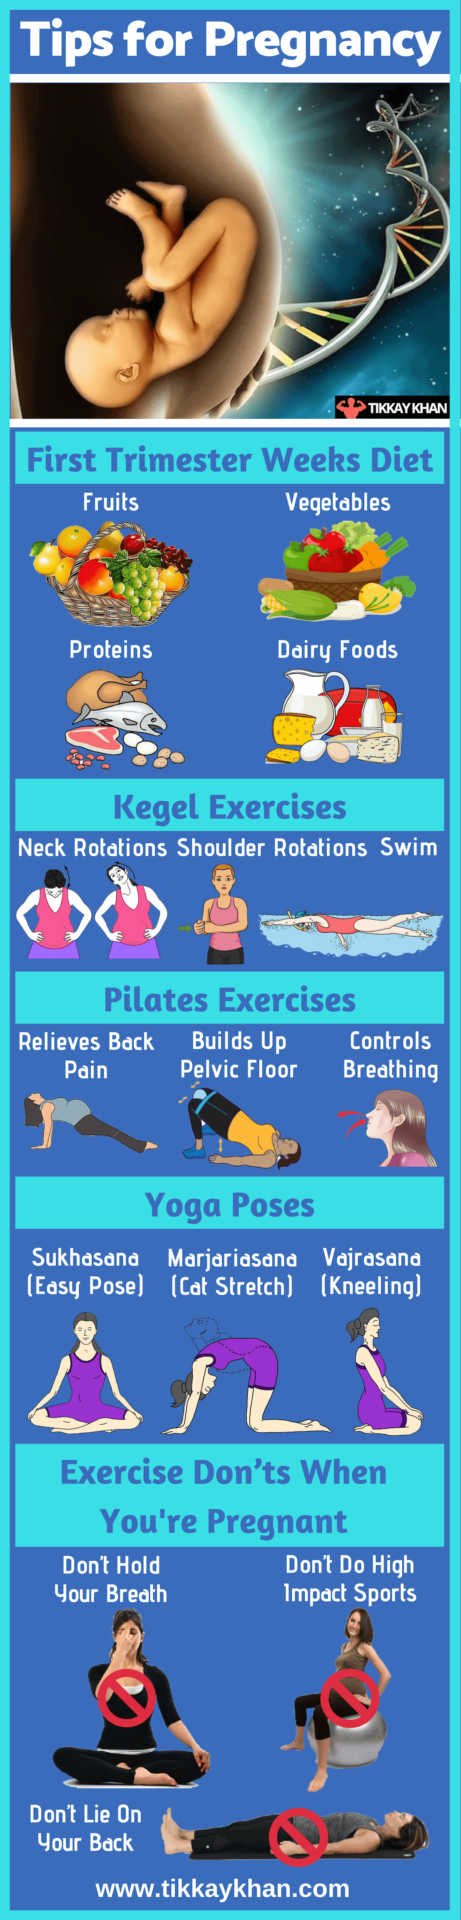 exercises for Pregnancy first trimester Infographic